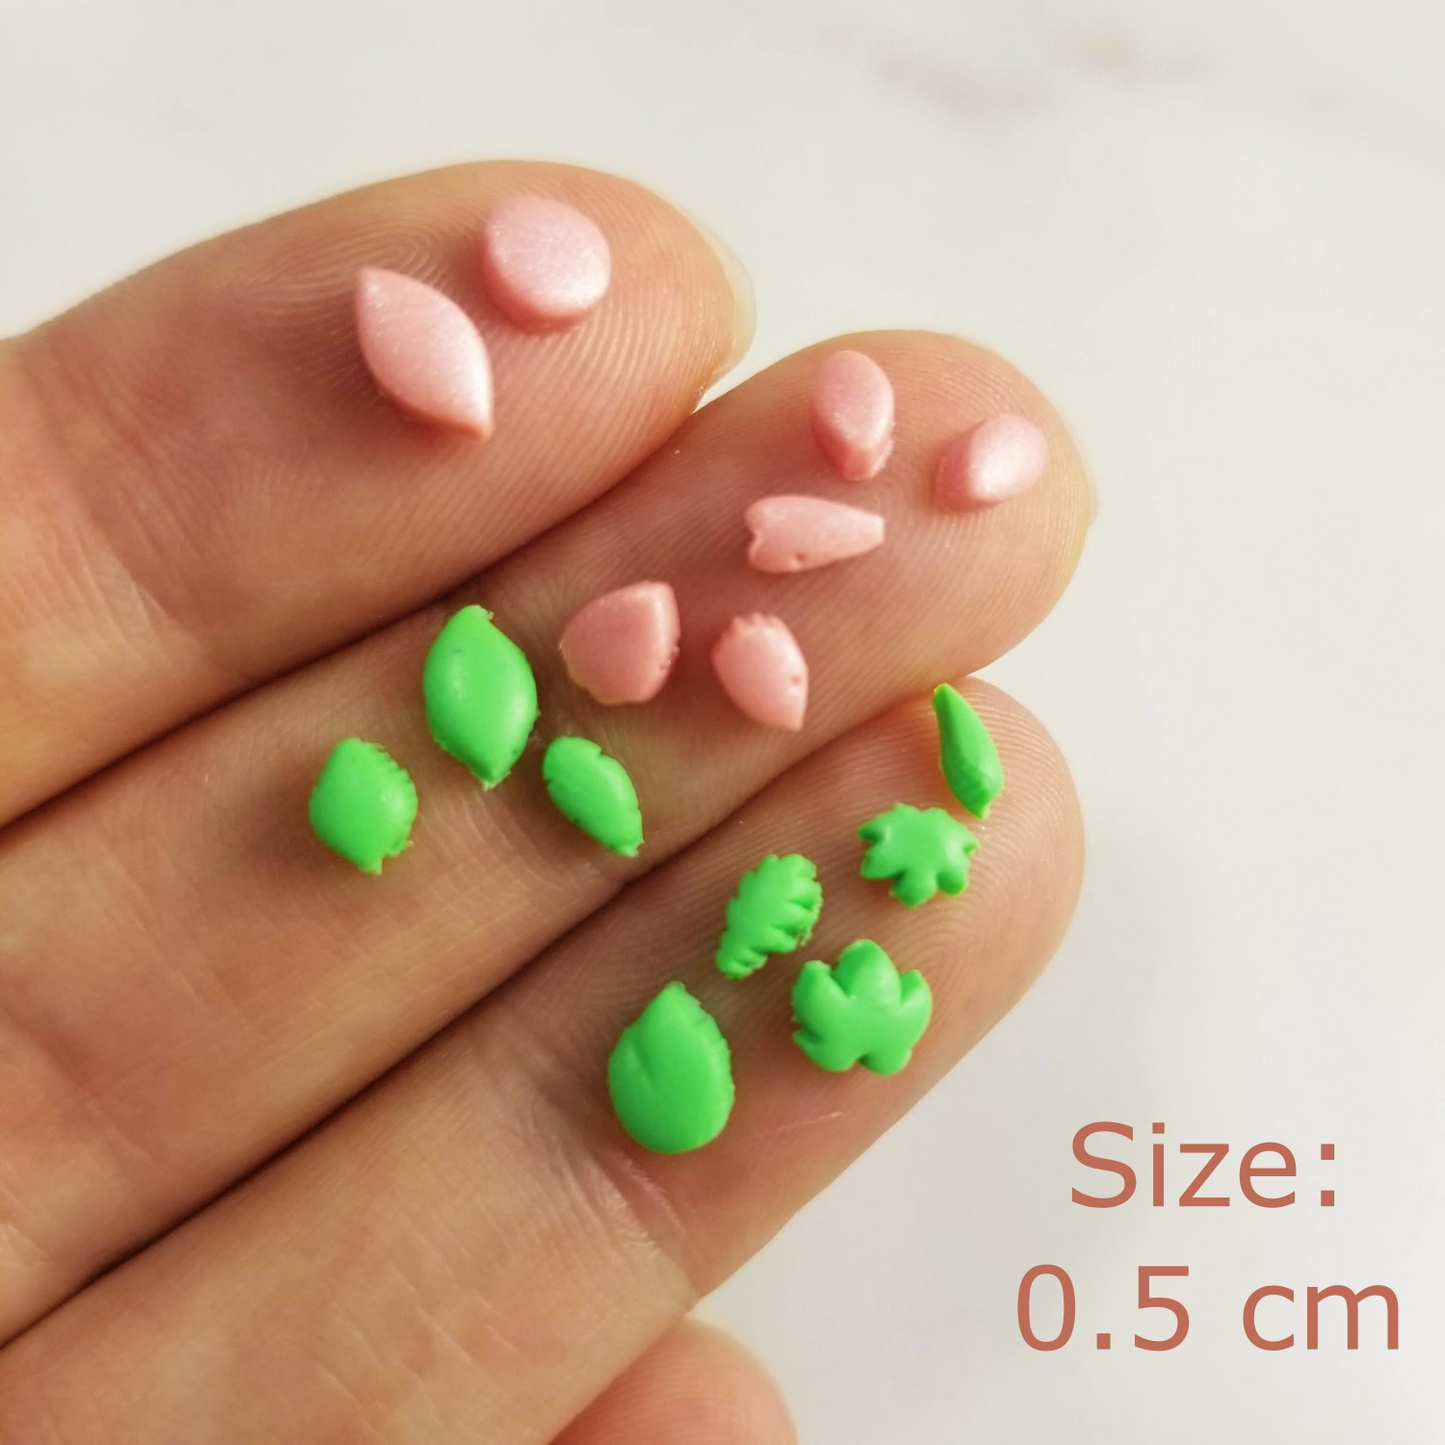 0.5 centimeter size Tiny leaves and flower petals set sample finish product for reference